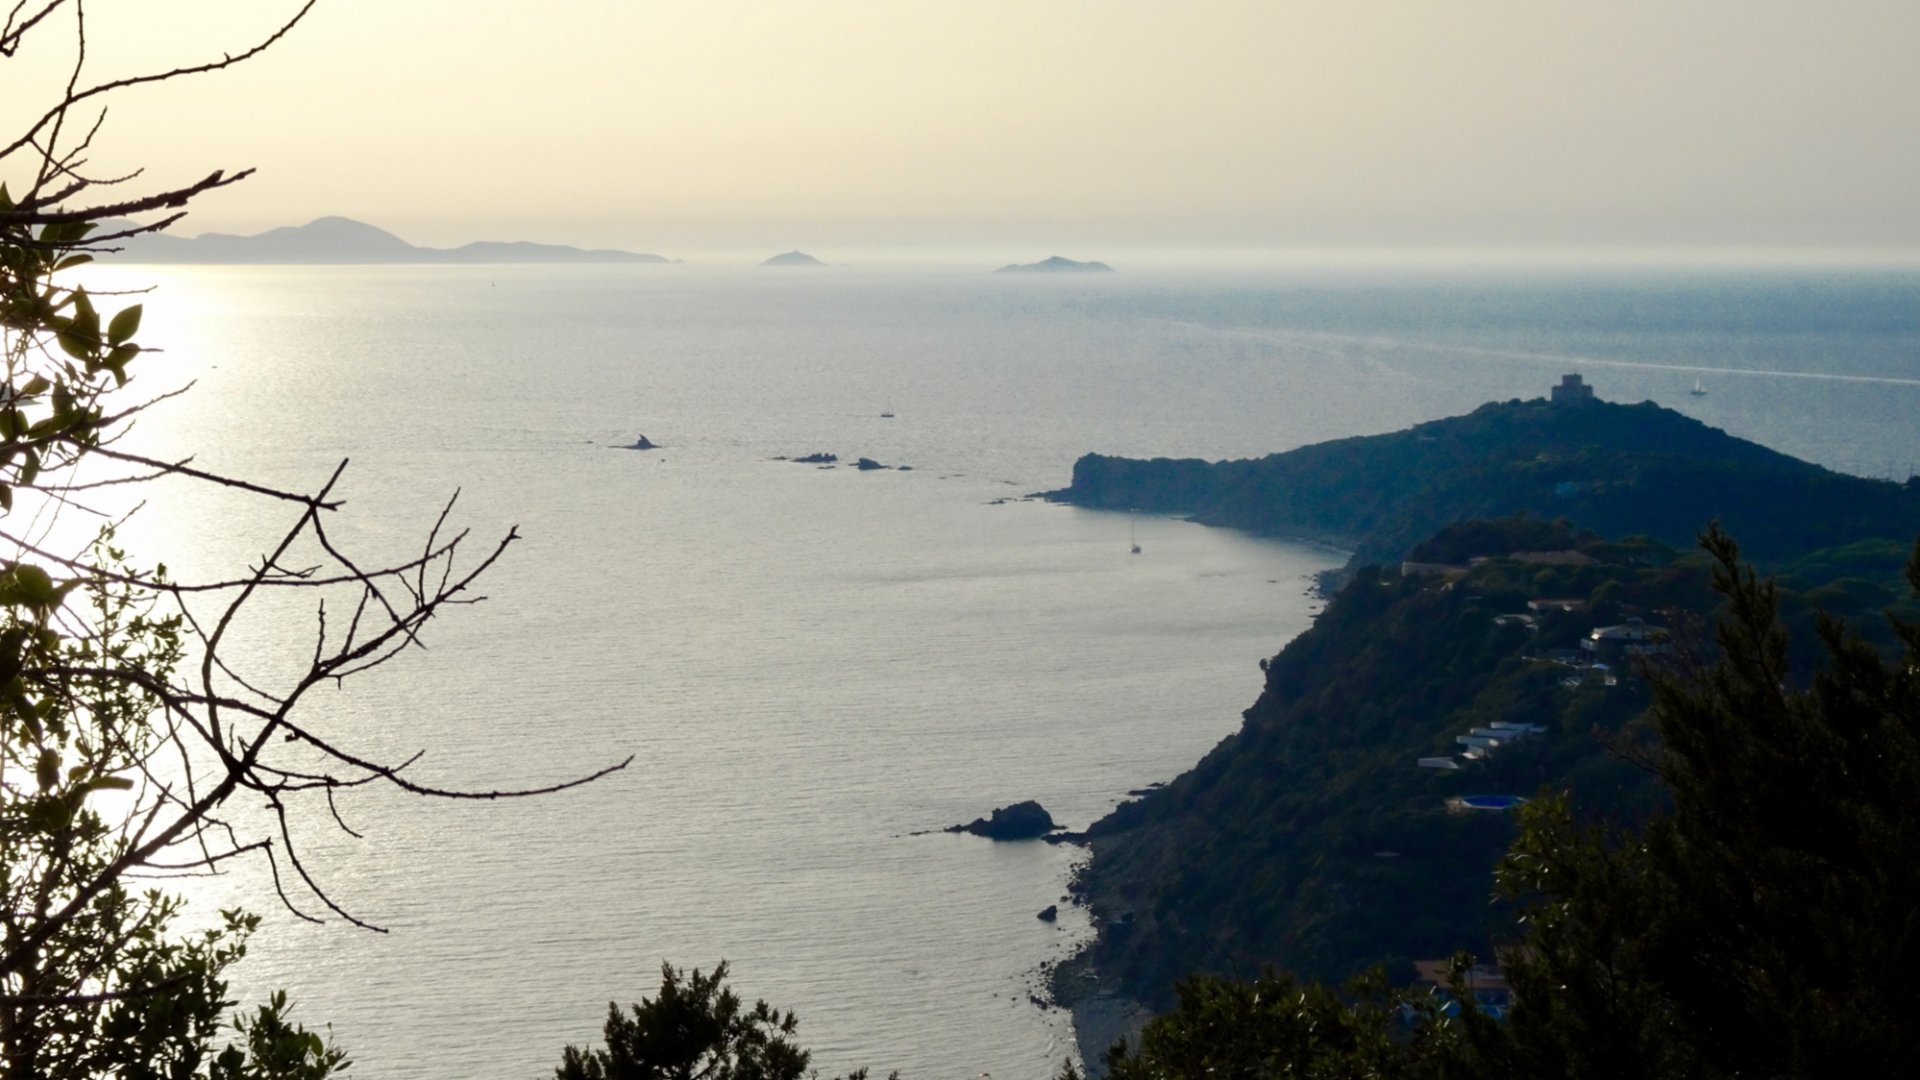 Trekking in Punta Ala. The cliffs overlooking the sea of the Tuscan Archipelago